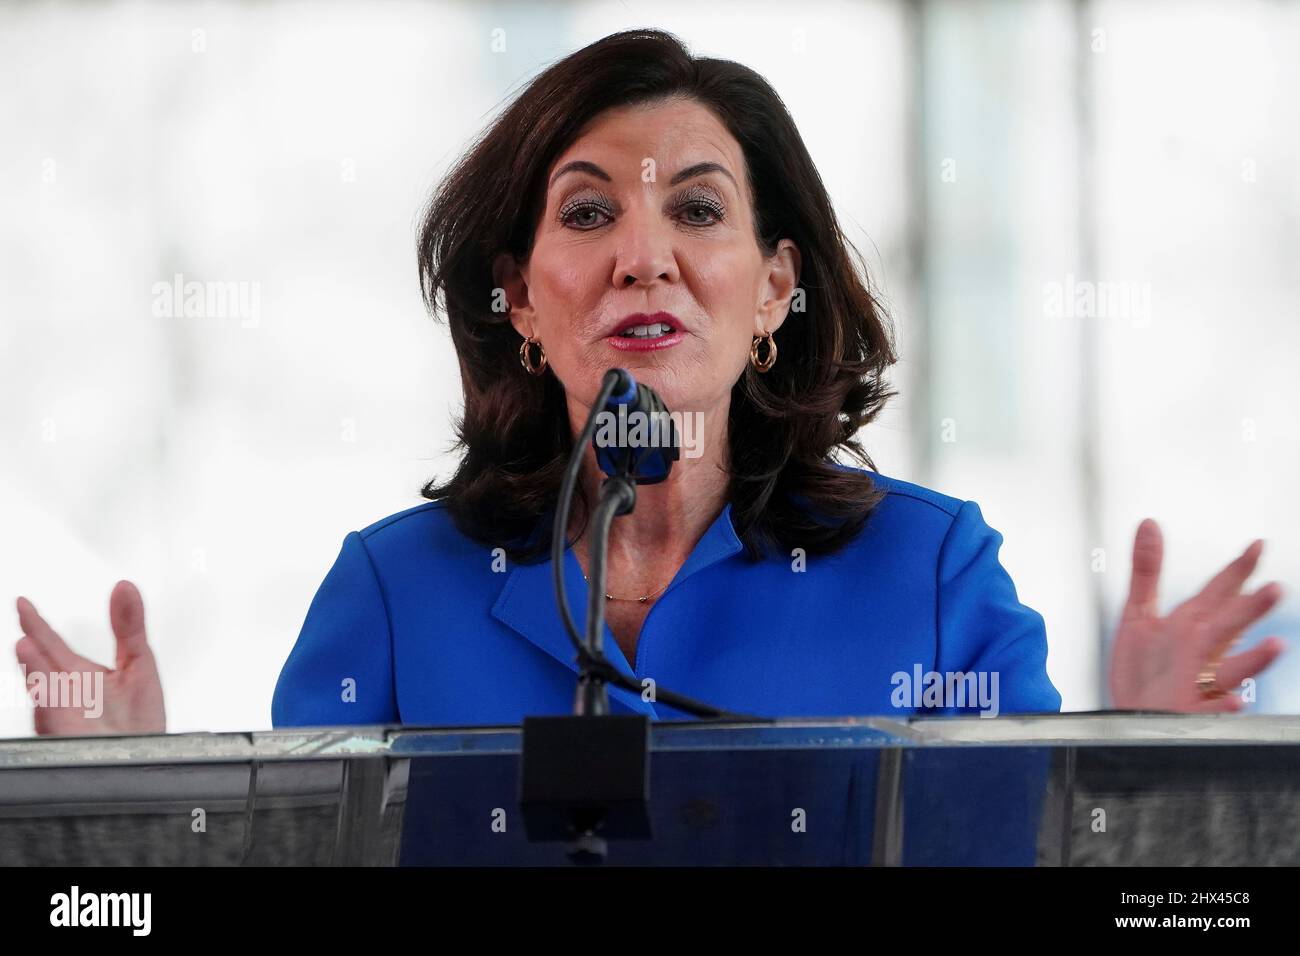 New York Governor Kathy Hochul speaks at a news conference about the newly renovated David Geffen Hall, in the Manhattan borough of New York City, New York, U.S., March 9, 2022.  REUTERS/Carlo Allegri Stock Photo